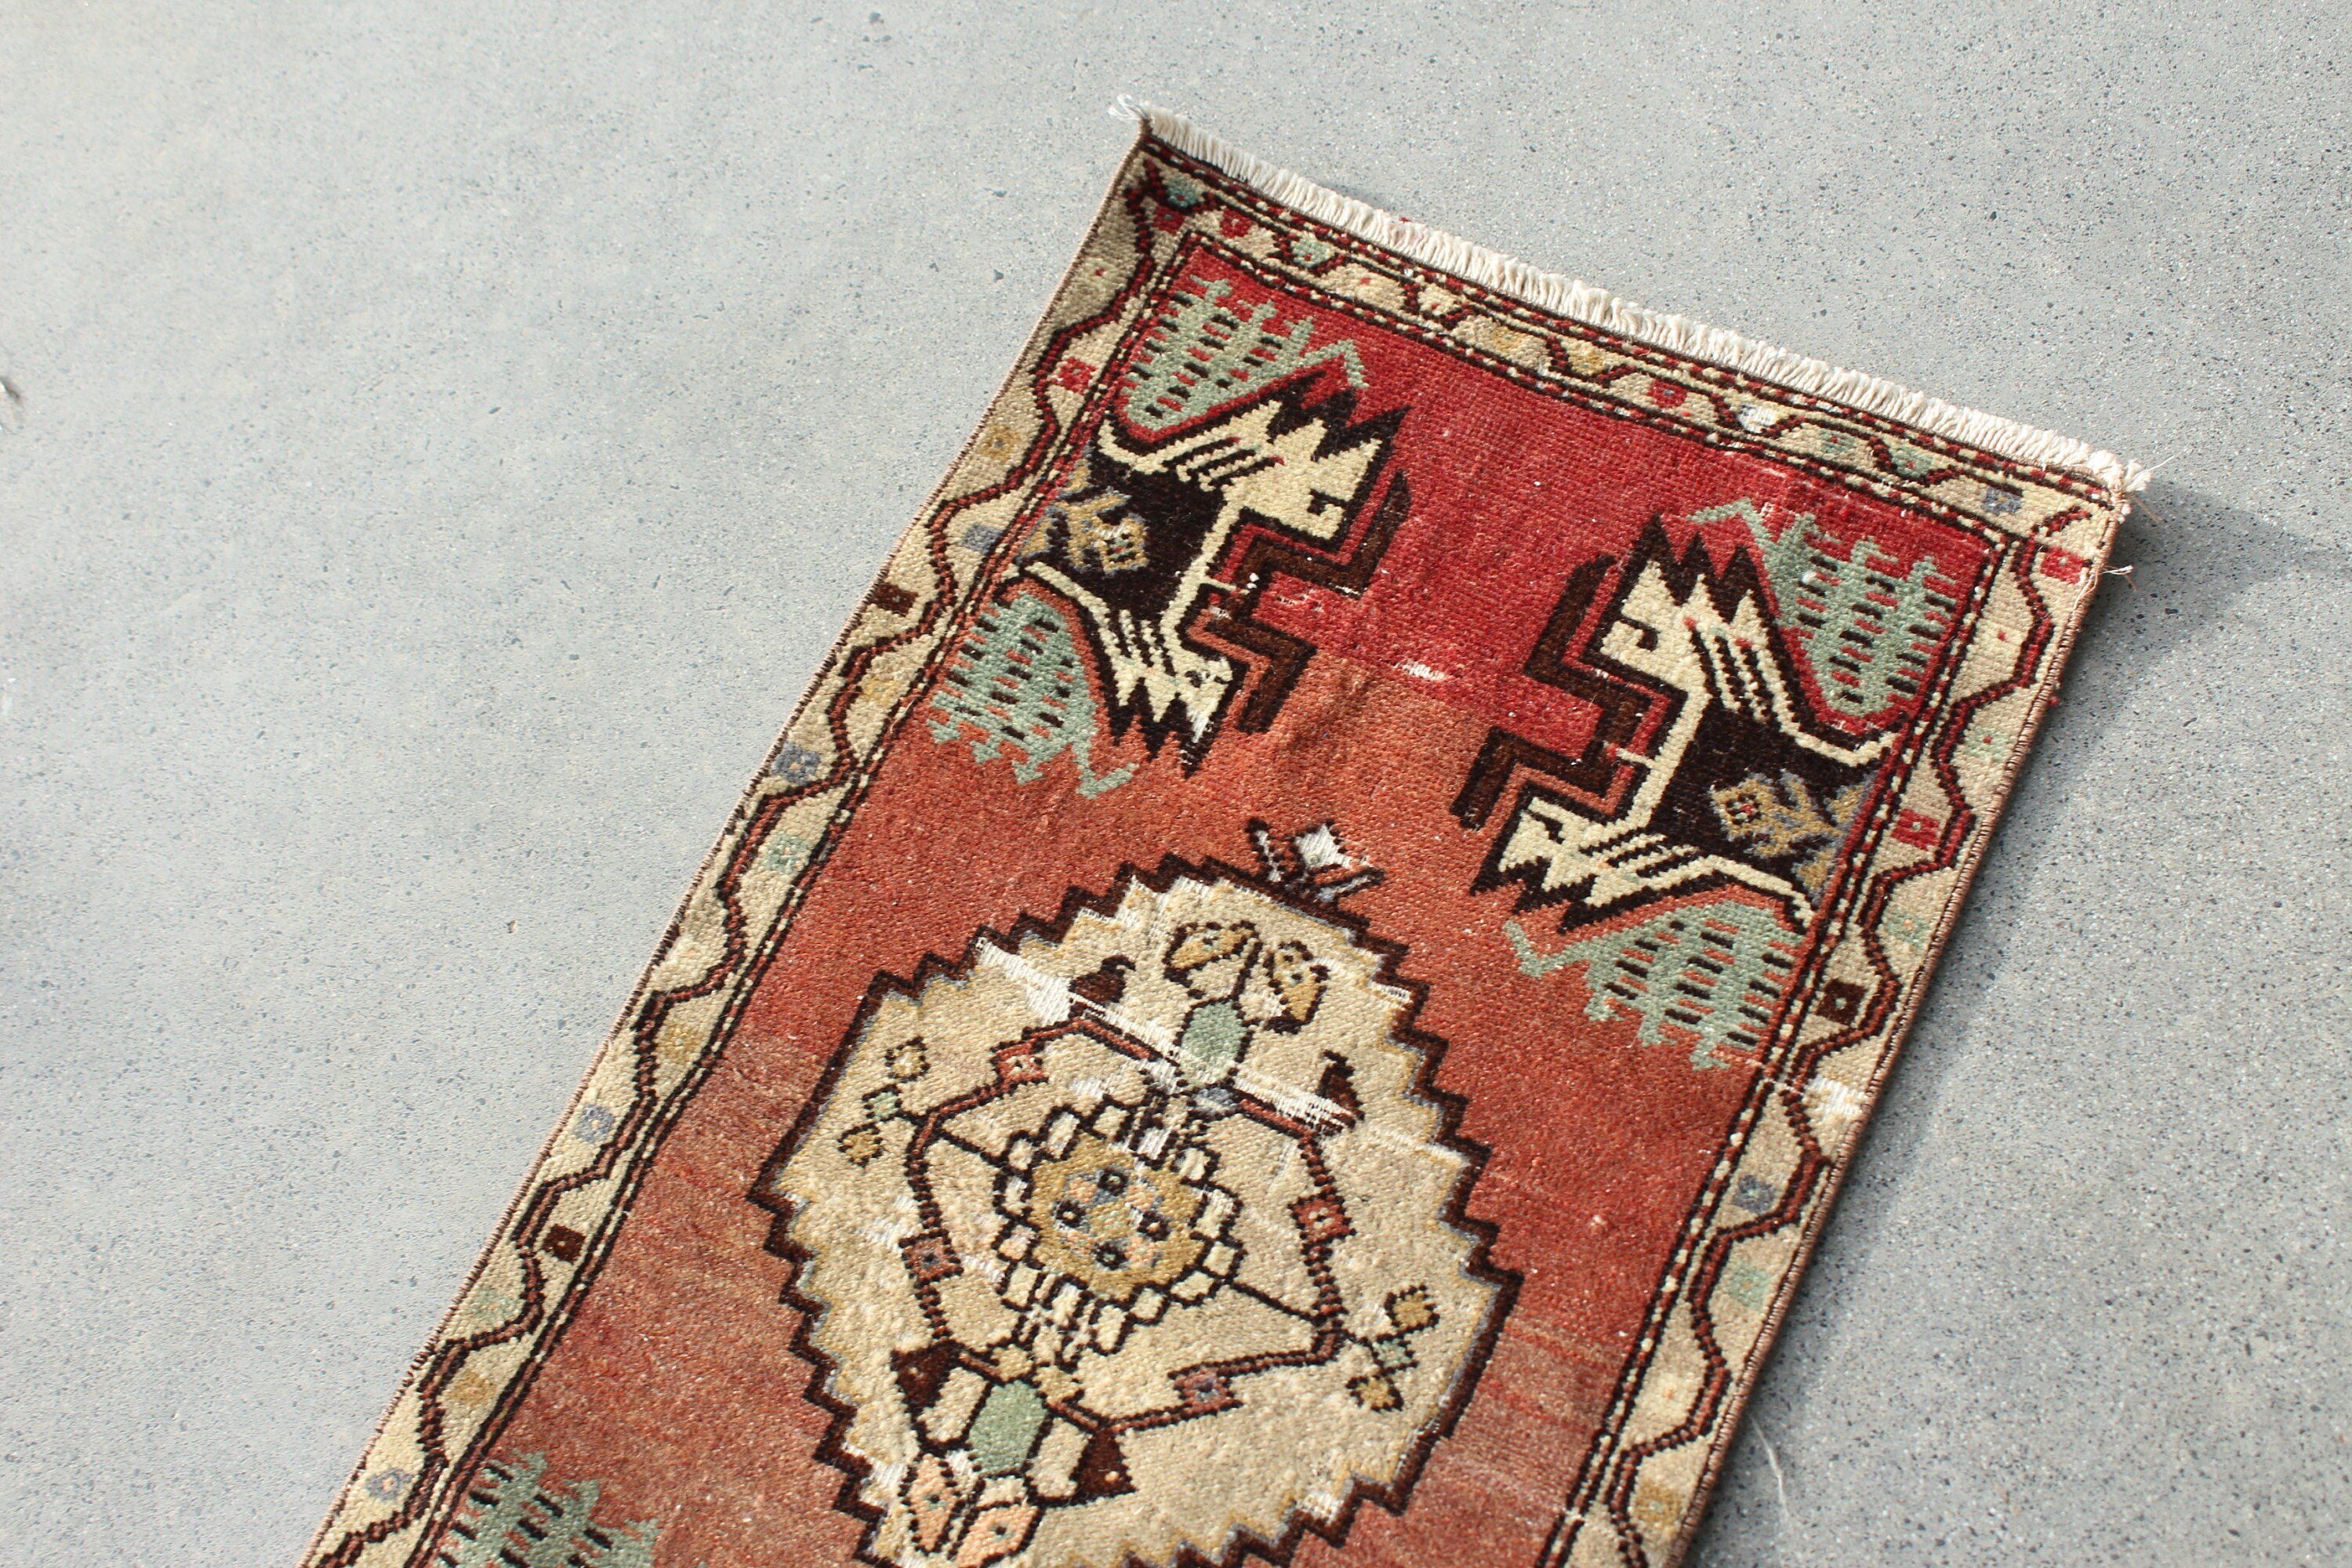 Car Mat Rug, Vintage Rugs, Cool Rugs, Bathroom Rug, Turkish Rugs, Rugs for Wall Hanging, Antique Rug, 1.6x3.2 ft Small Rug, Brown Cool Rug